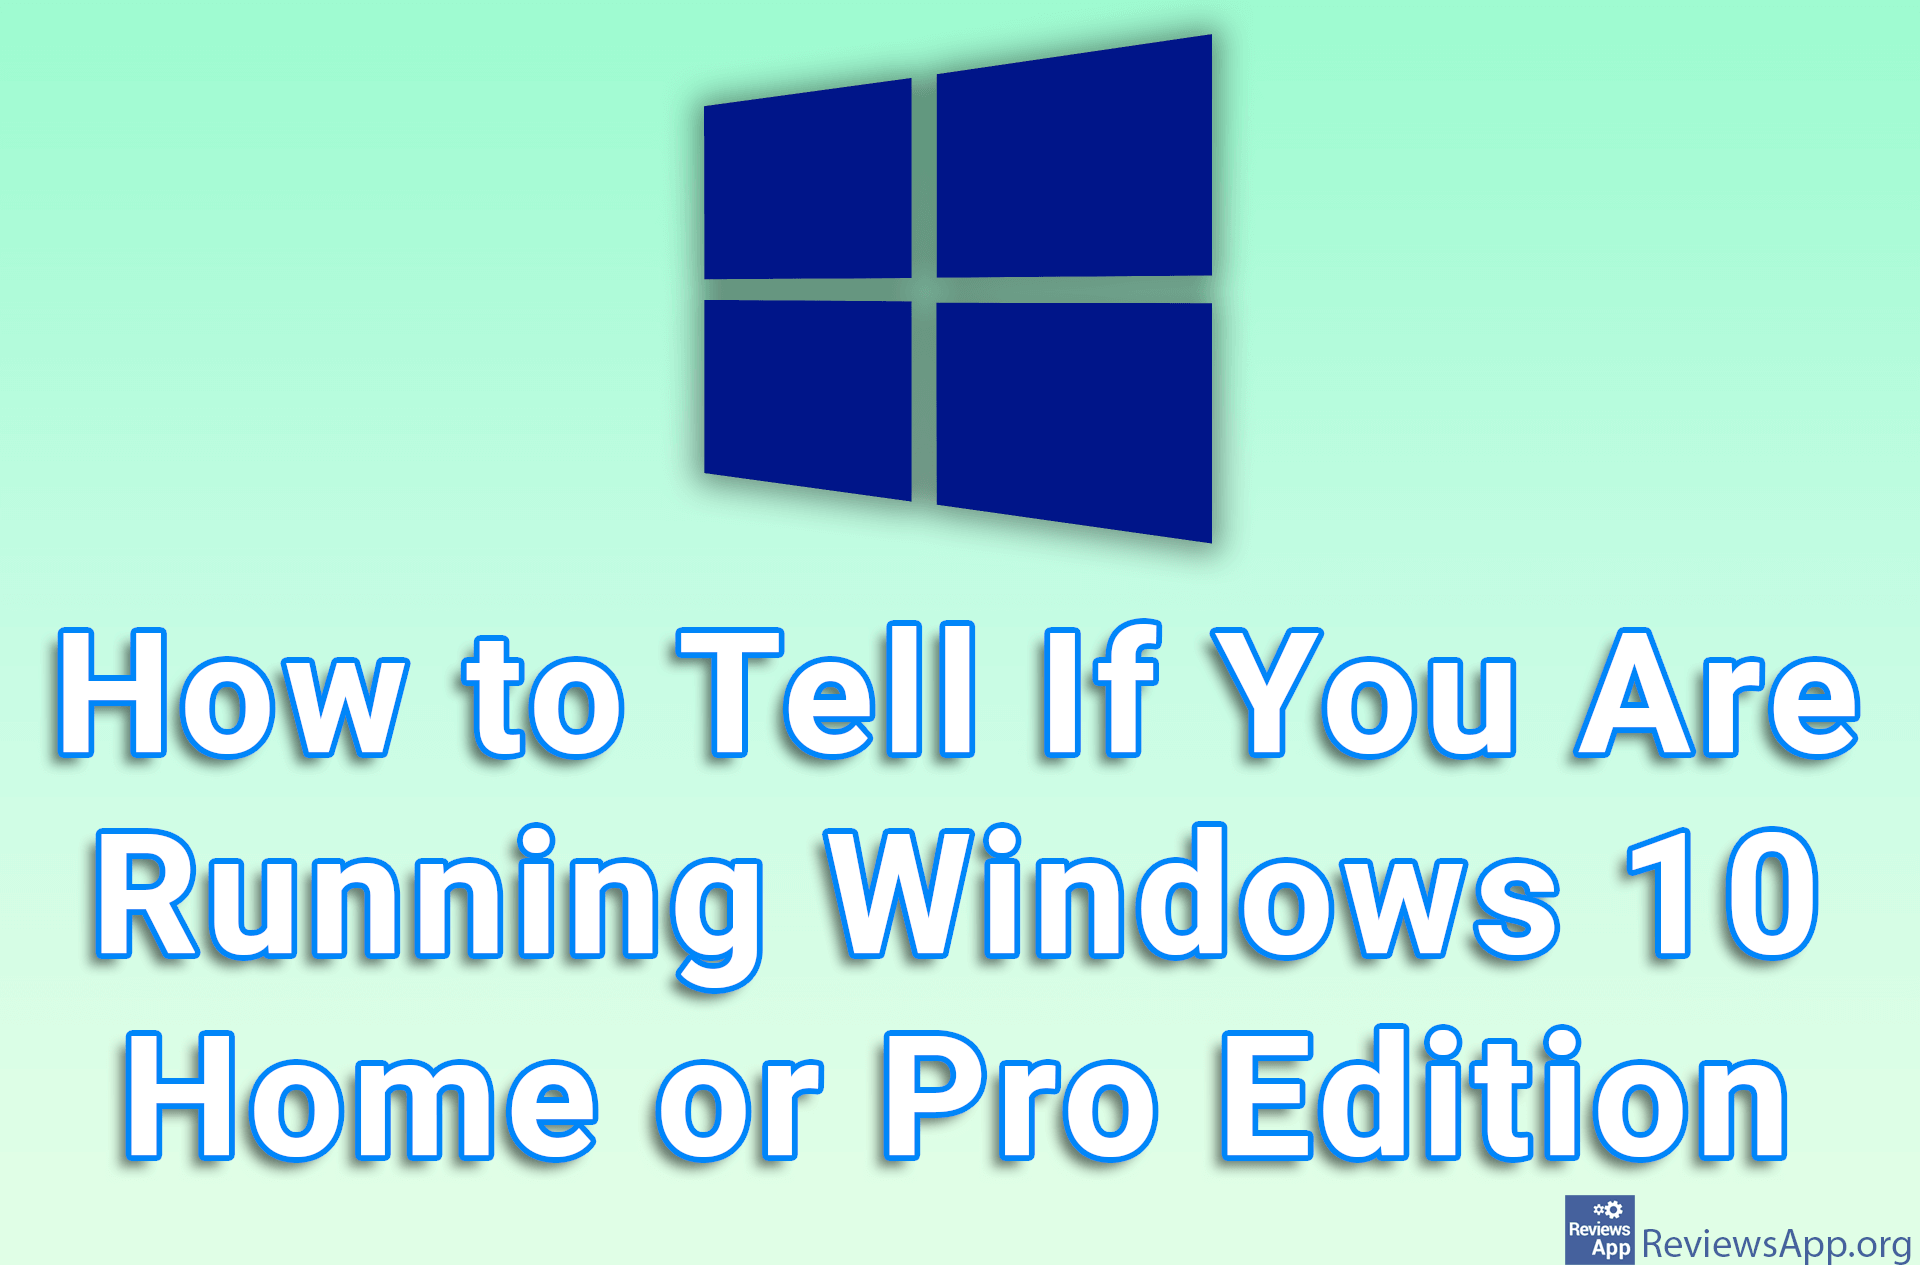 How to Tell If You Are Running Windows 10 Home or Pro Edition